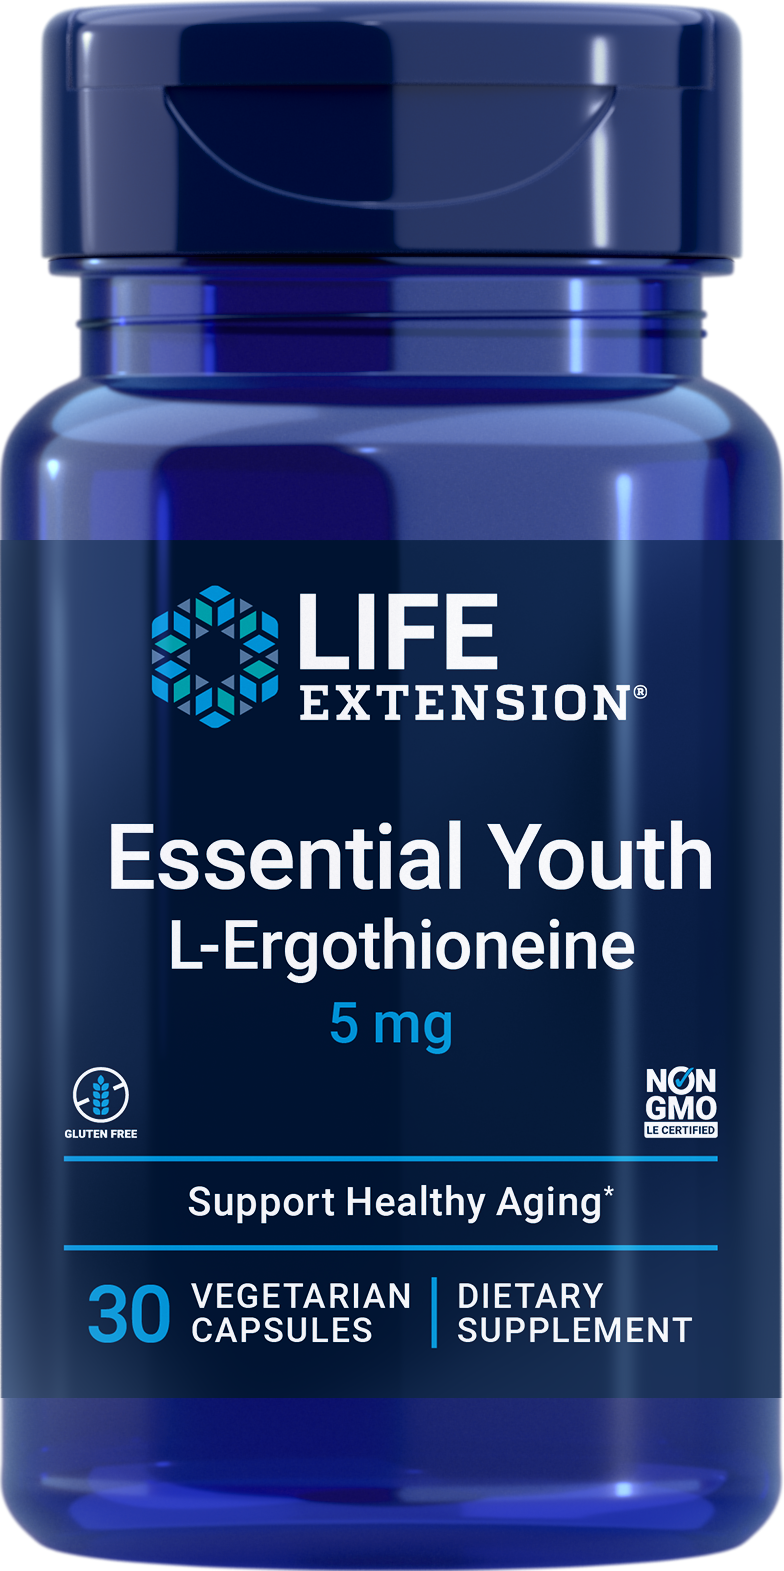 Life Extension Essential Youth L-Ergothioneine, 30 vegetarian capsules with longevity and cell-protecting properties